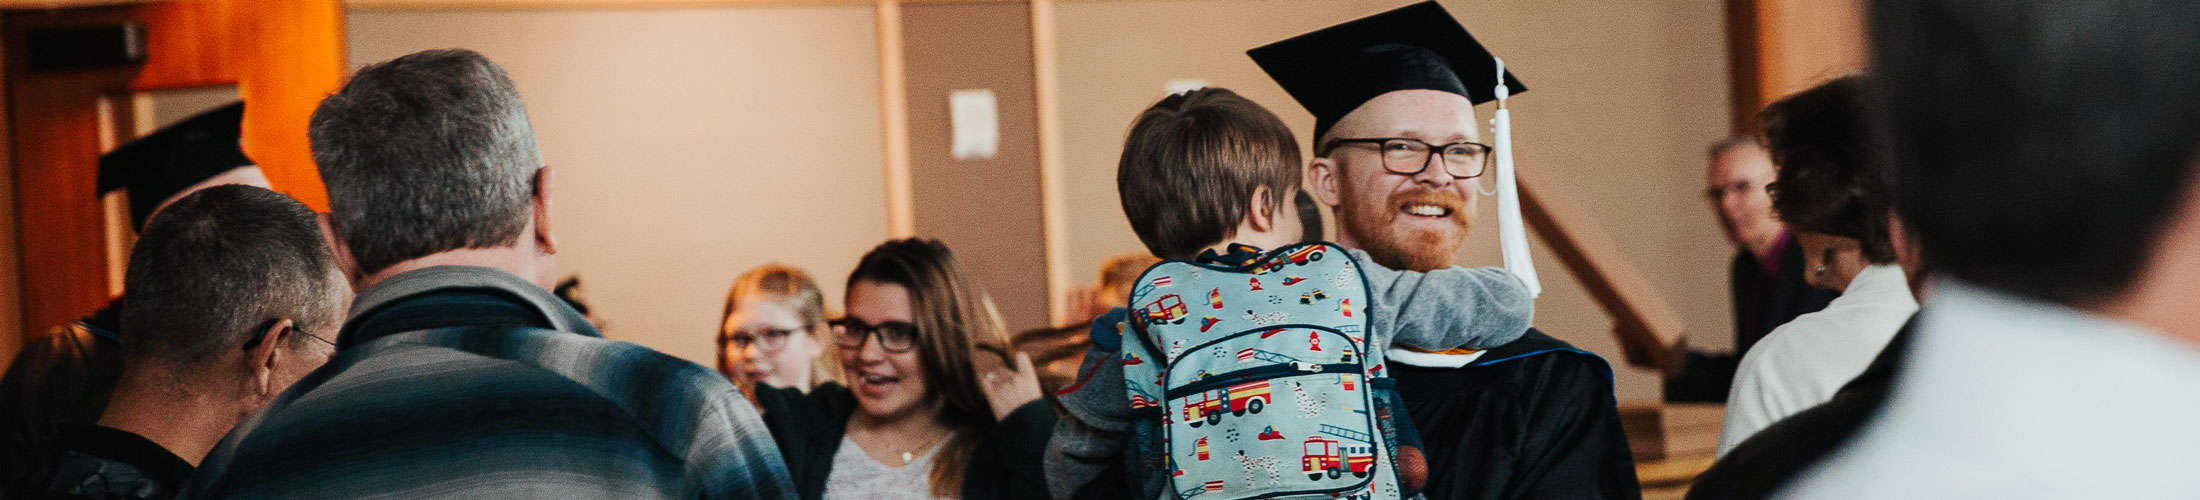 student at graduation with child